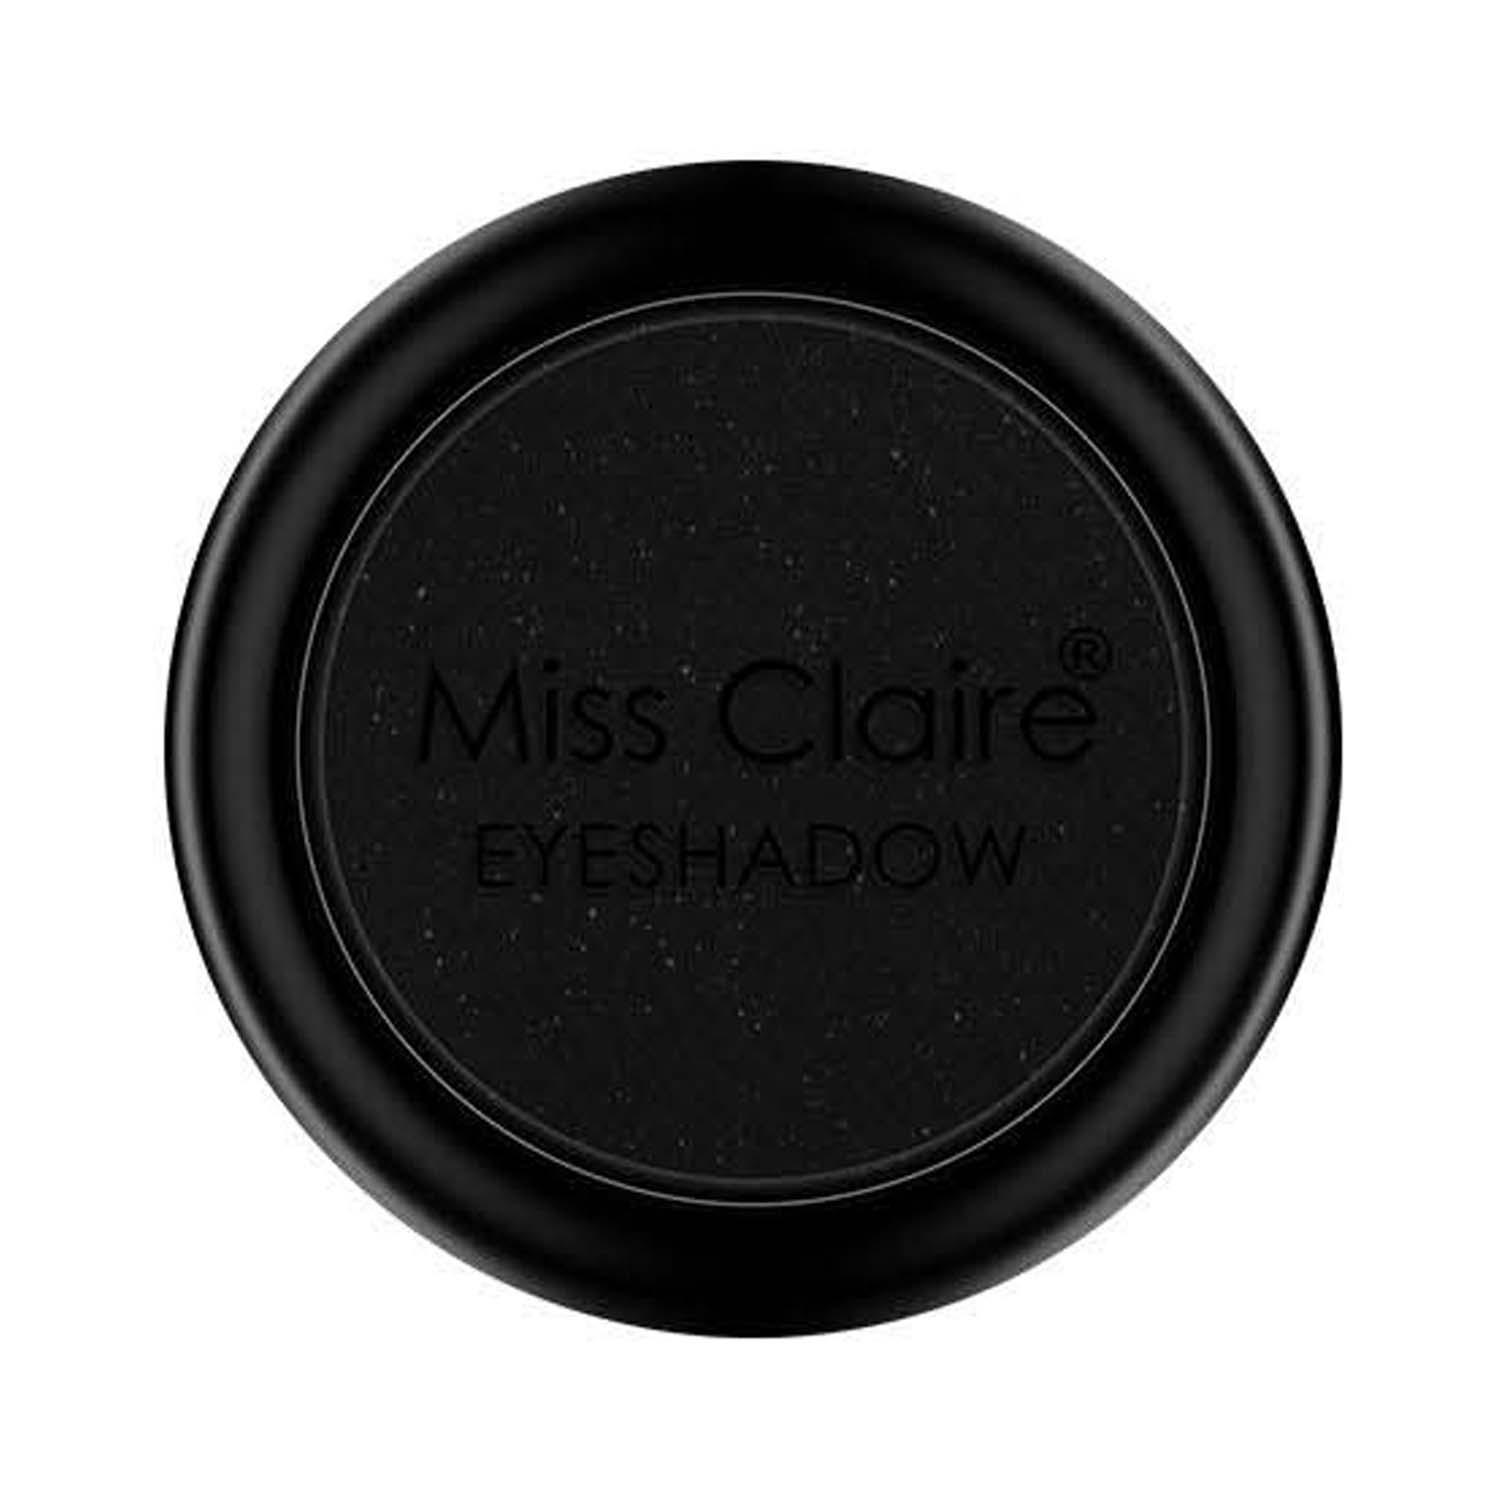 Miss Claire Single Eyeshadow - 0804 (2g)